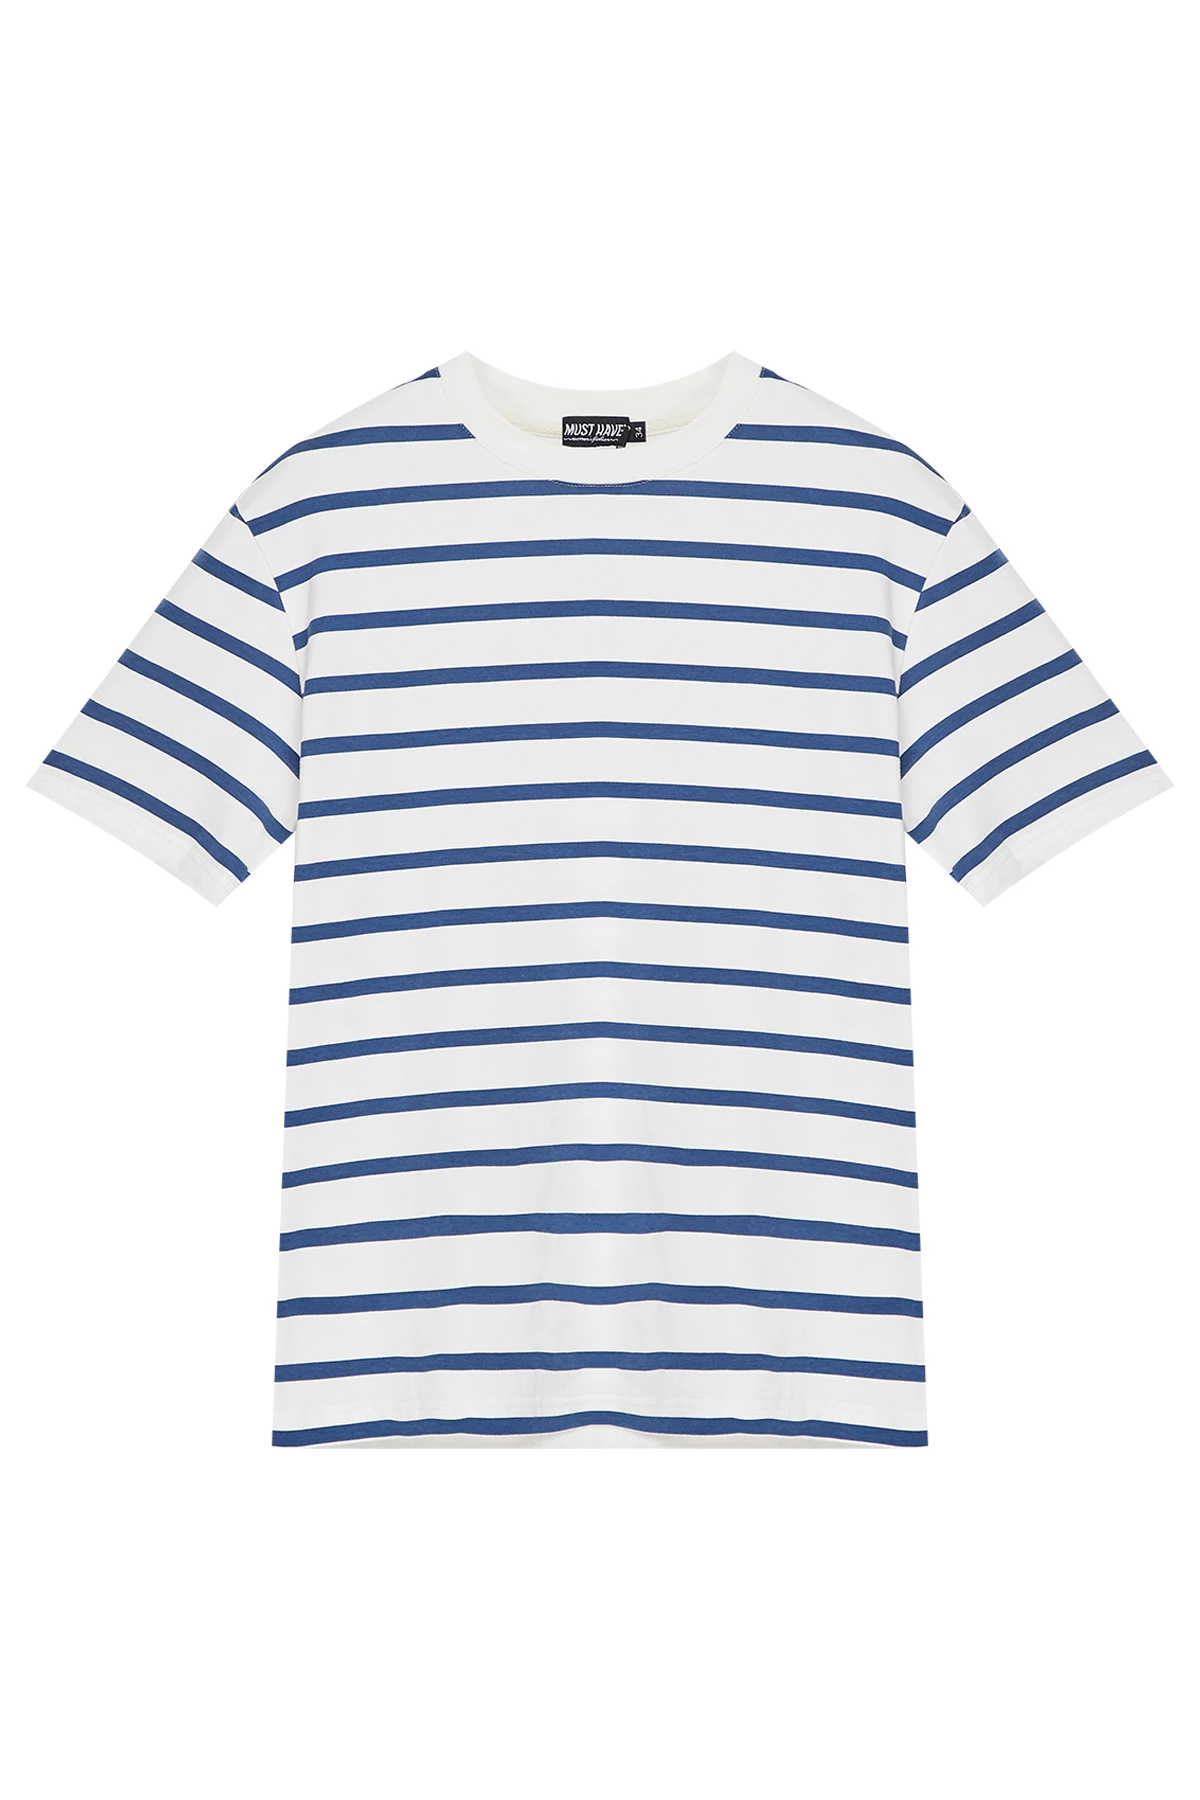 Striped white and blue cotton T-shirt, photo 5